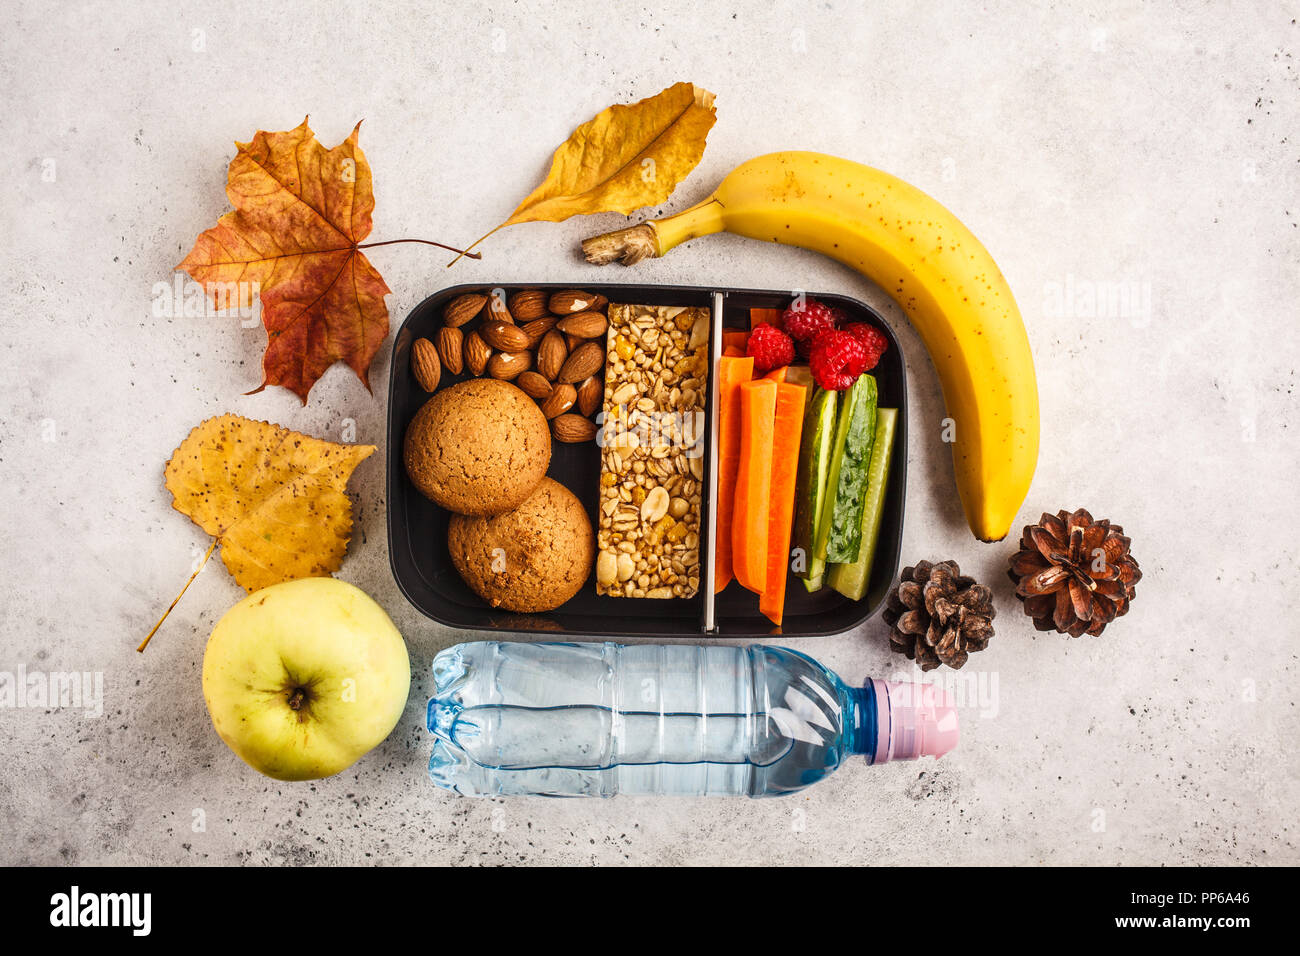 https://c8.alamy.com/comp/PP6A46/healthy-meal-prep-containers-with-cereal-bar-fruits-vegetables-and-snacks-takeaway-food-on-white-background-top-view-lunch-box-to-school-PP6A46.jpg